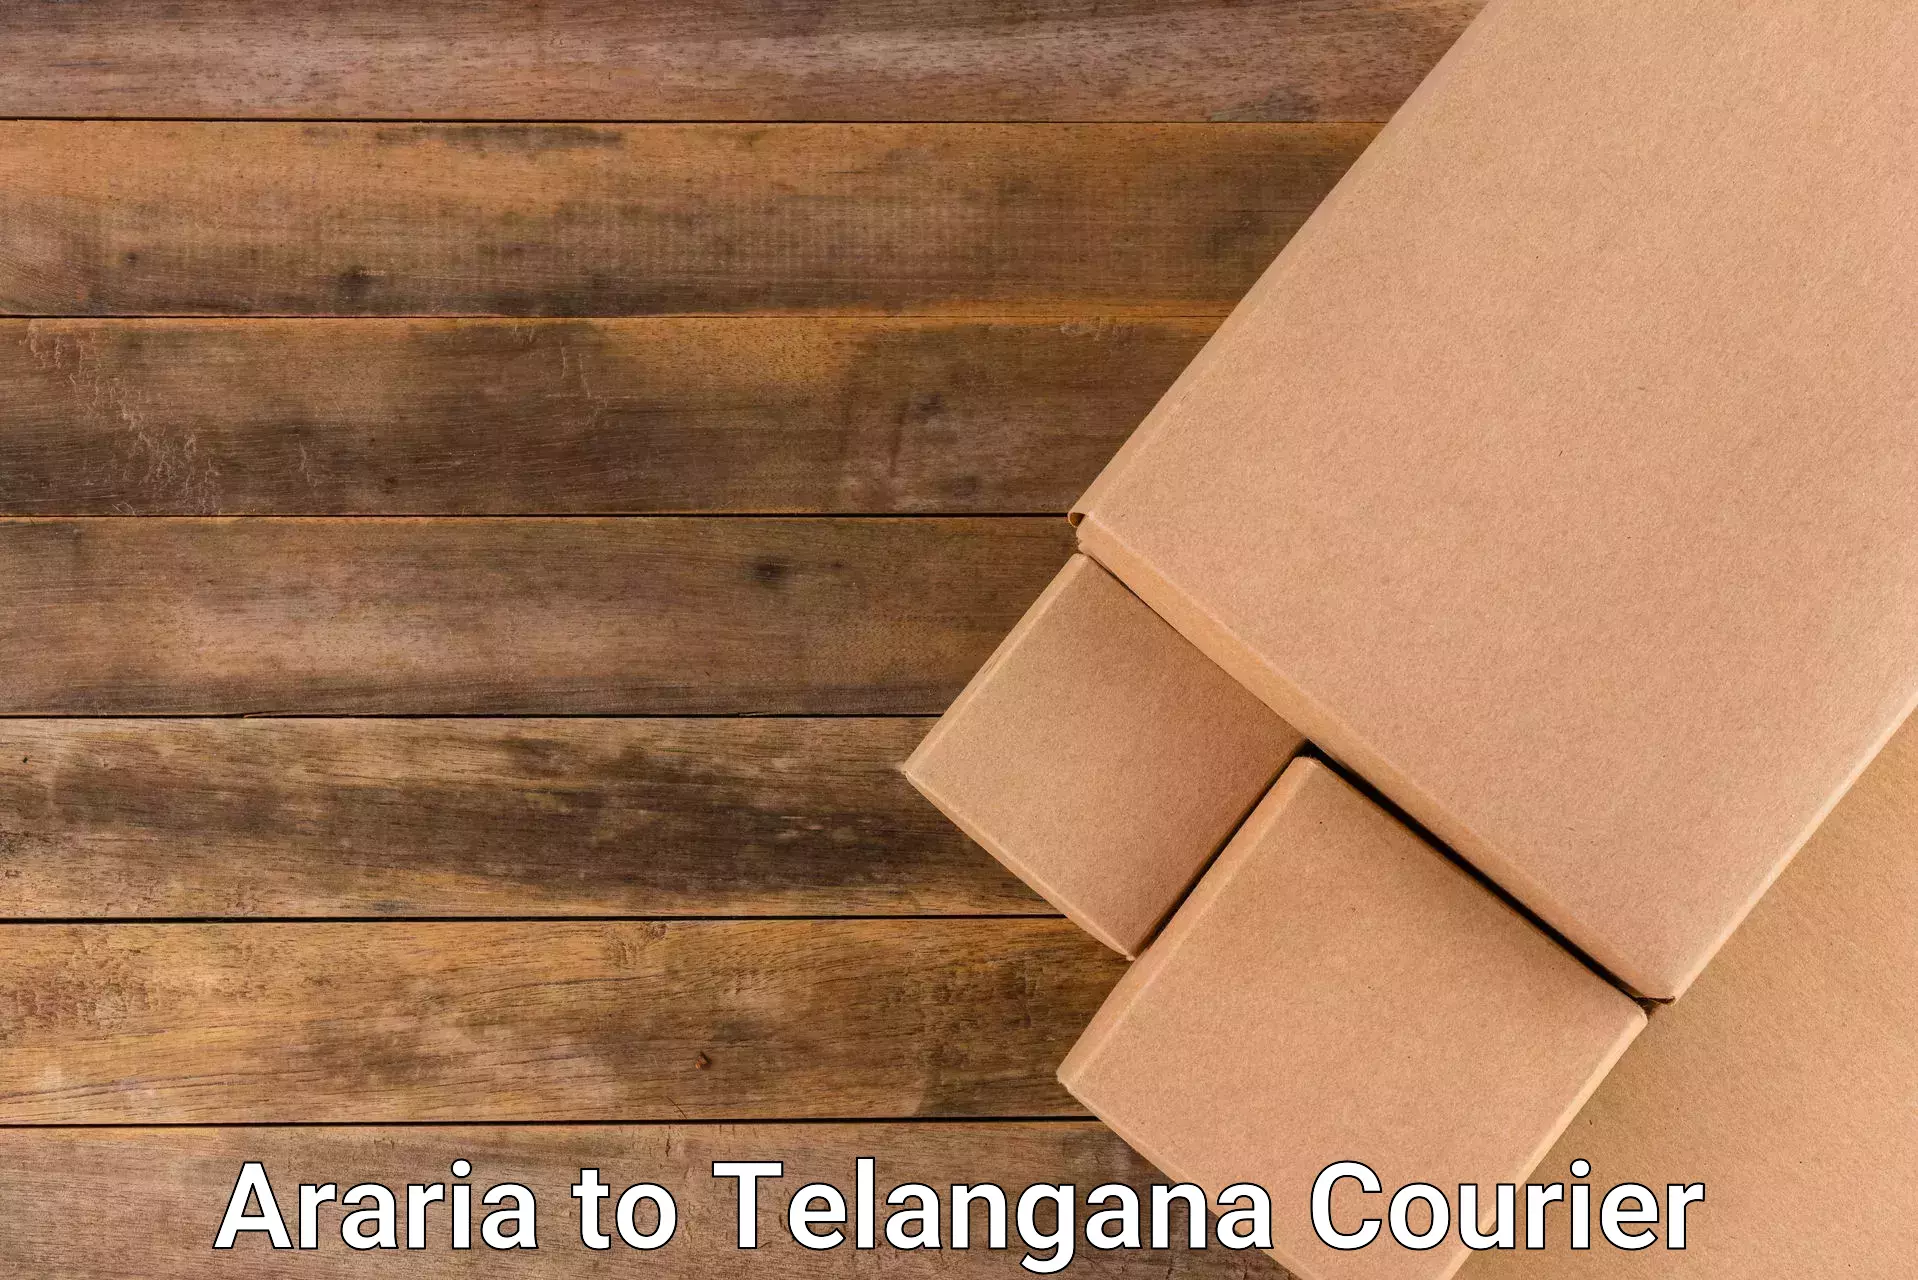 State-of-the-art courier technology Araria to Cherla